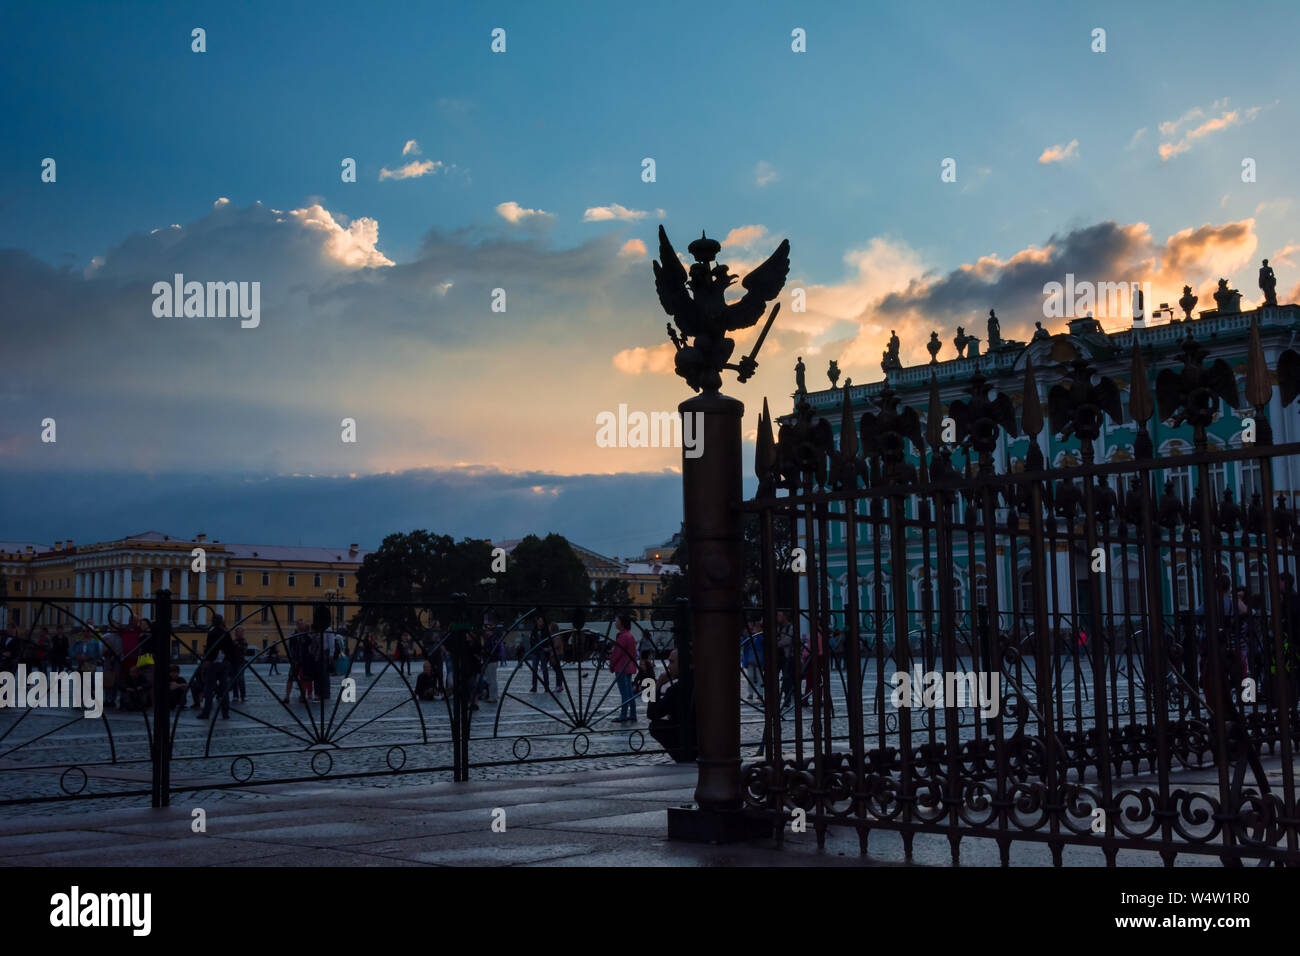 SAINT PETERSBURG, RUSSIA - JULY 15, 2016: Bronze State two-headed eagle on the fence of the Alexander Column on The Palace Square in St. Petersburg, R Stock Photo